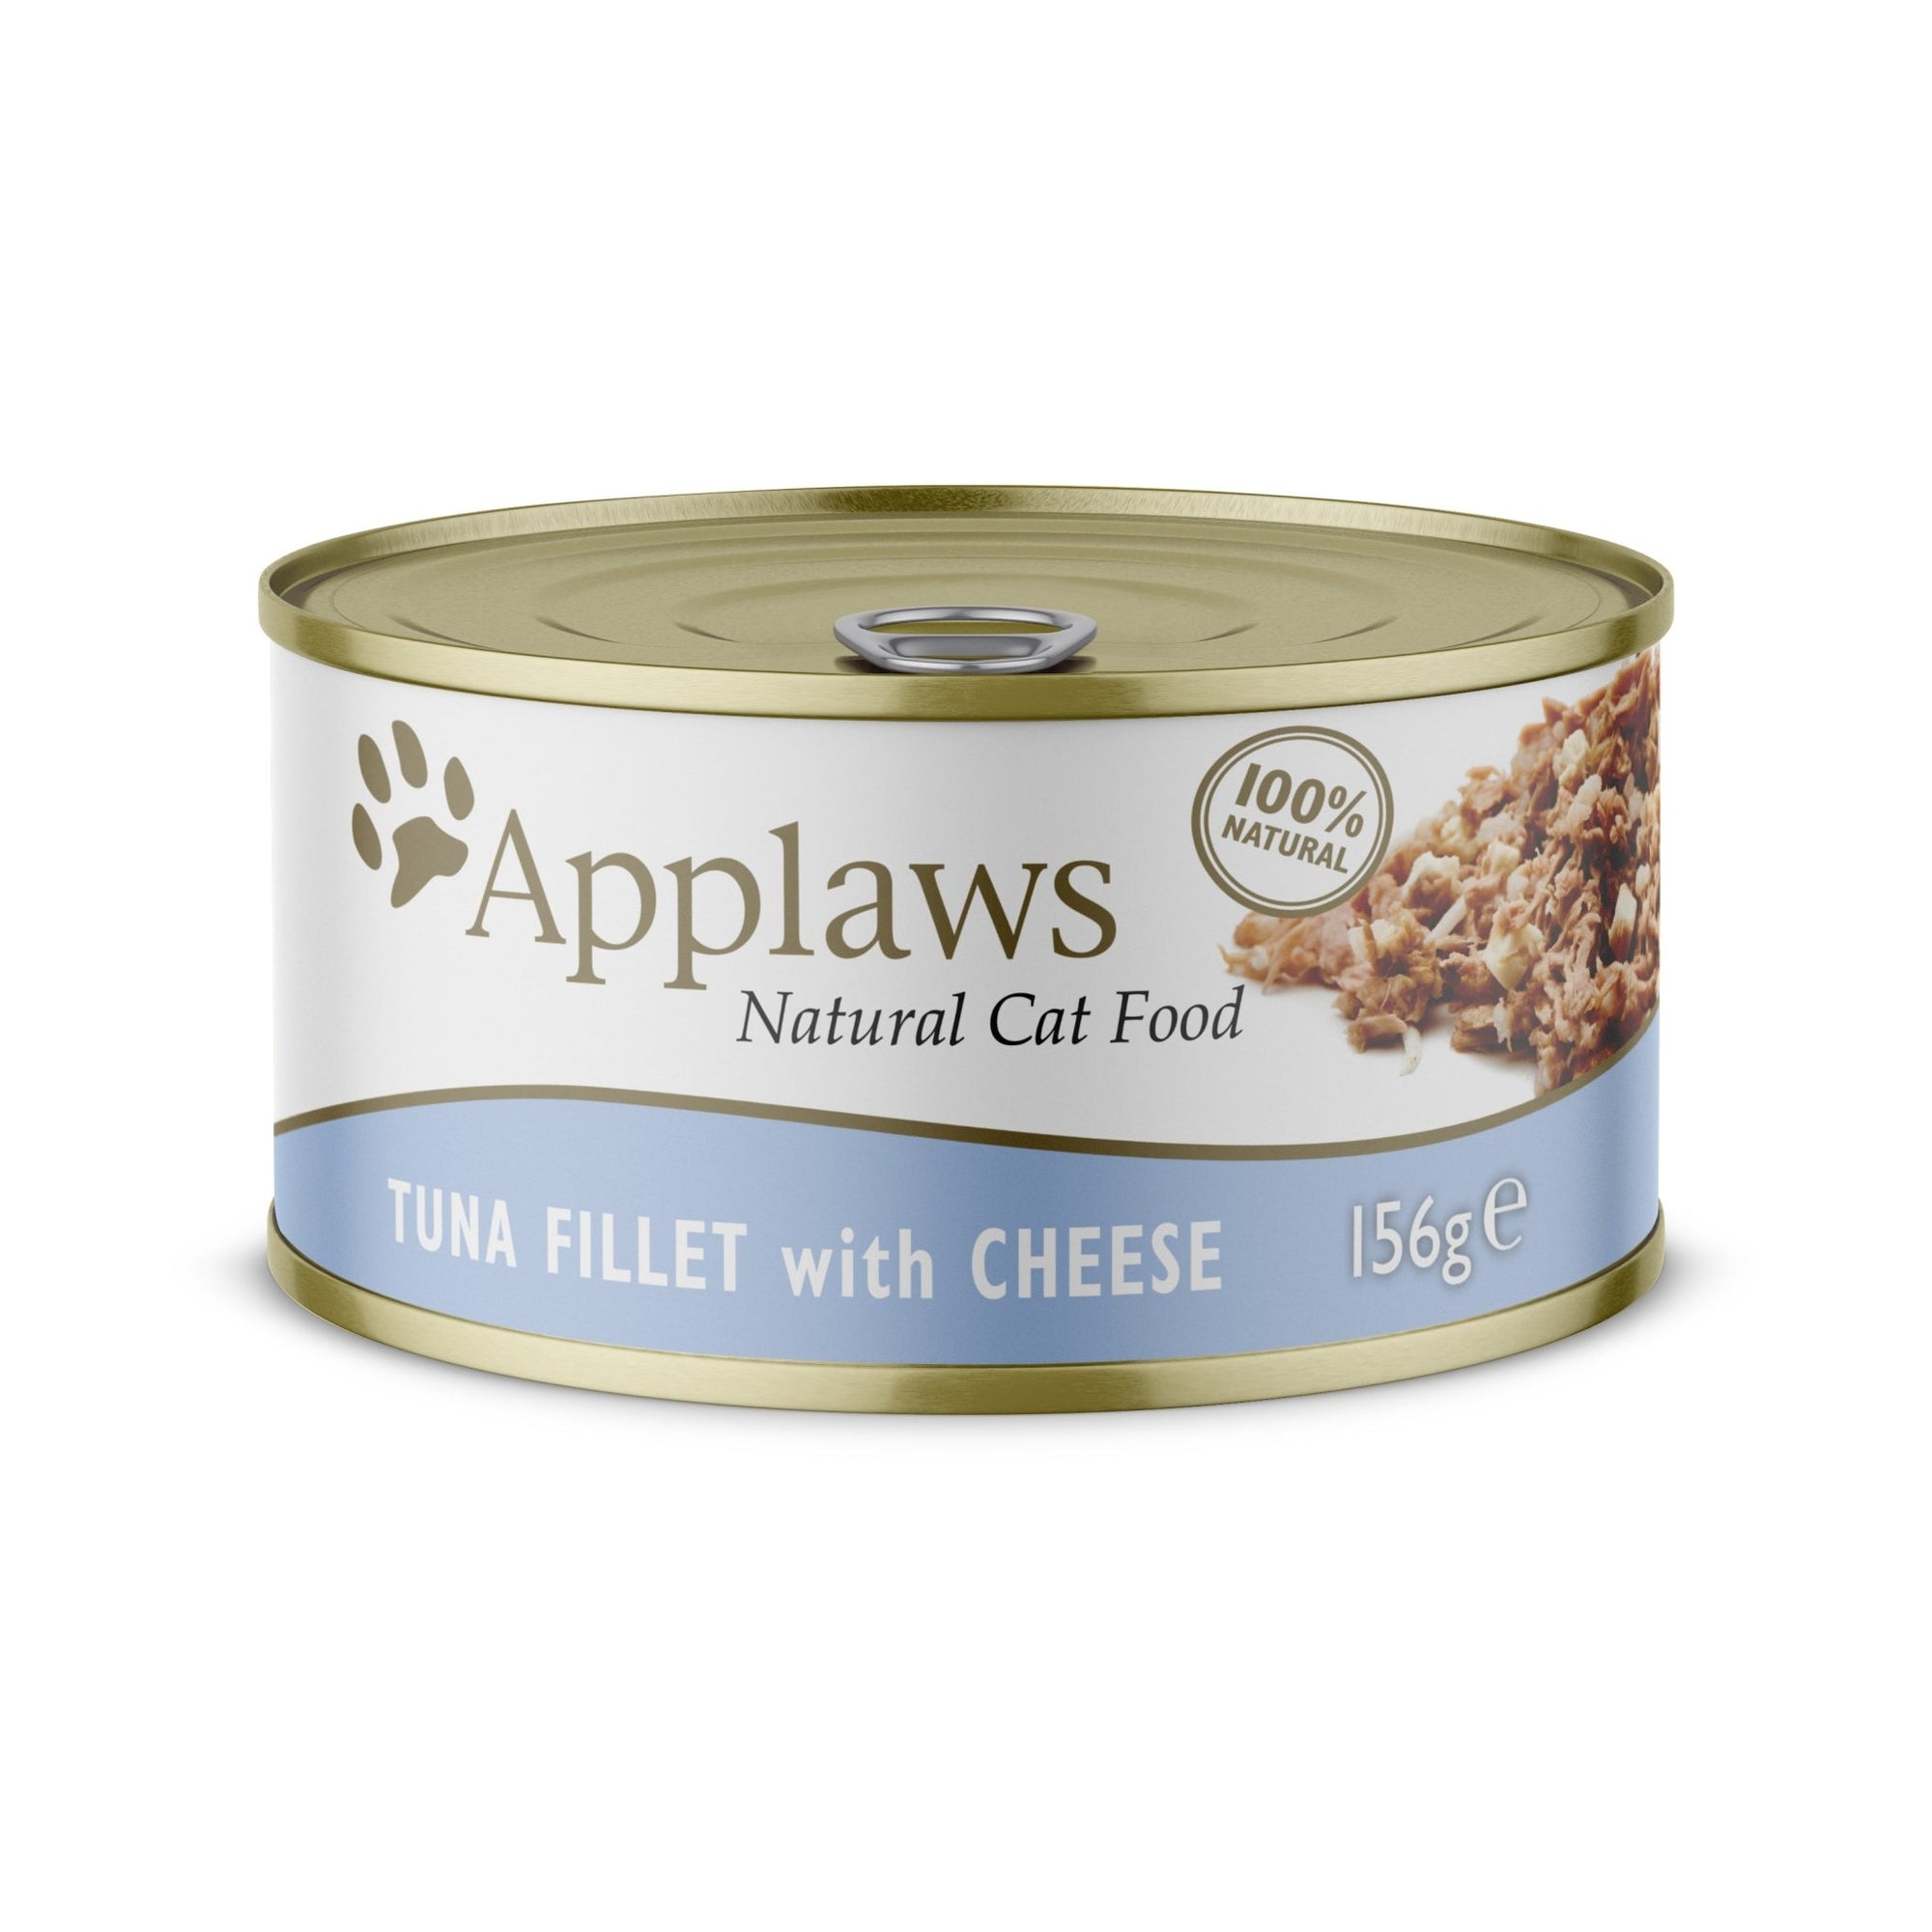 Applaws Cat Tuna Fillet with Cheese in Broth Tins 24 x 156g, Applaws,